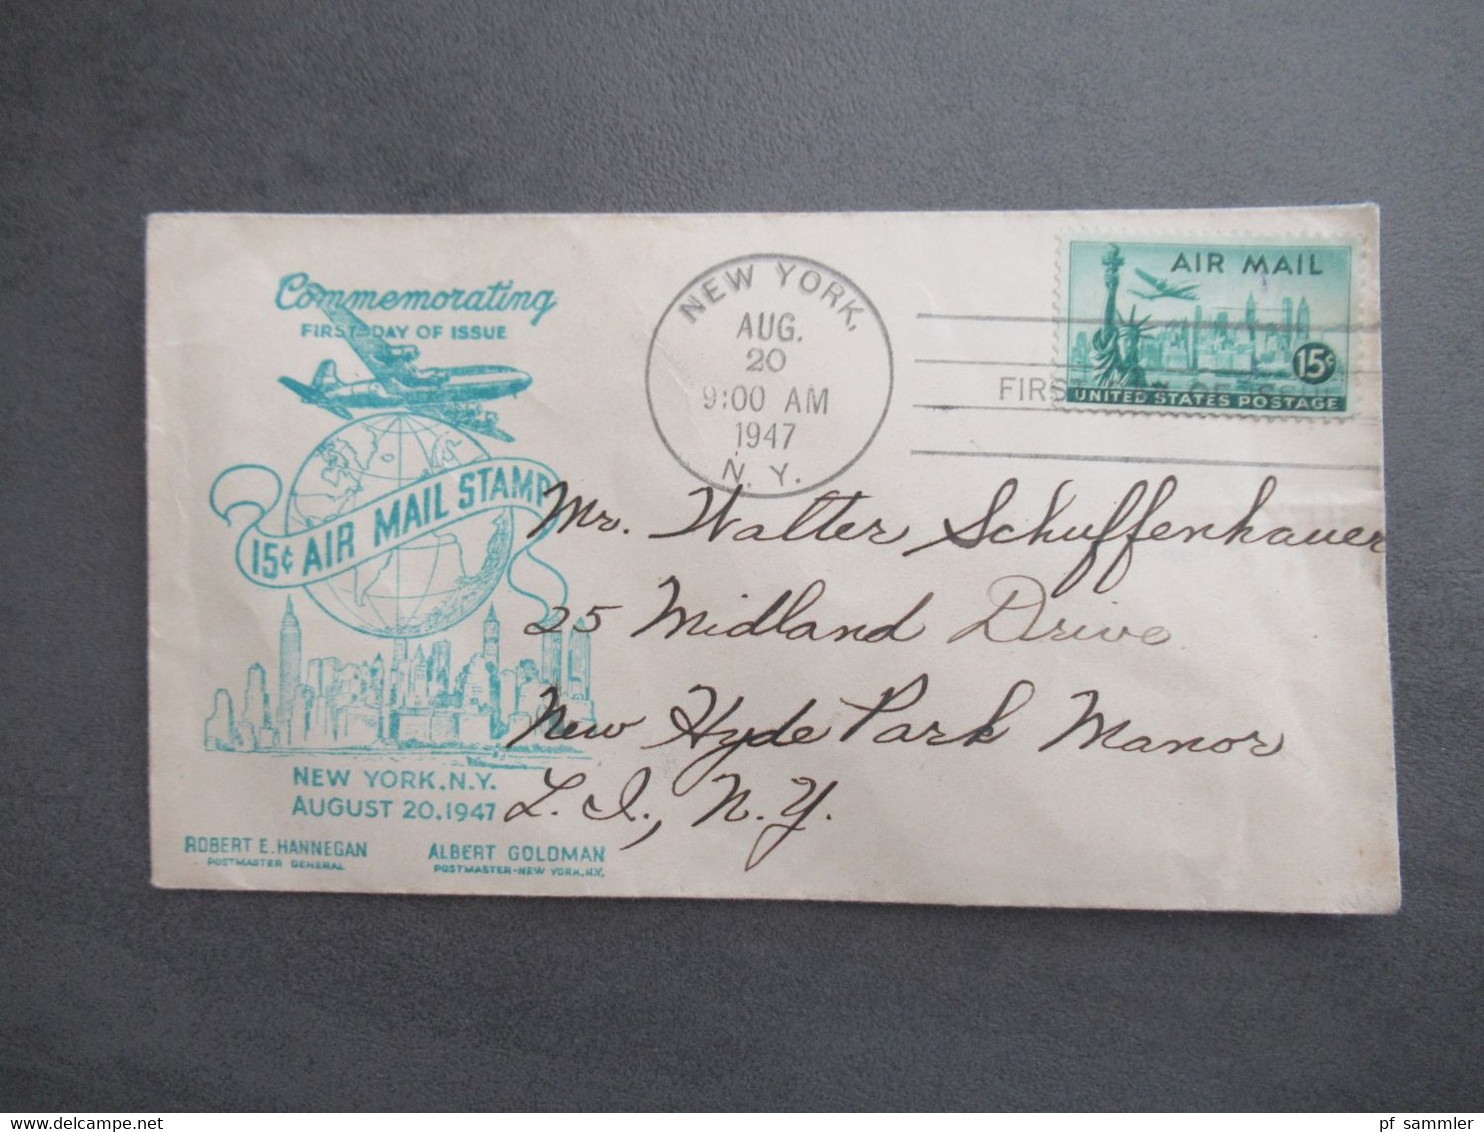 USA Commemorating FDC 15 Cent Air Mail Stamp New York 20. August 1947 - Covers & Documents